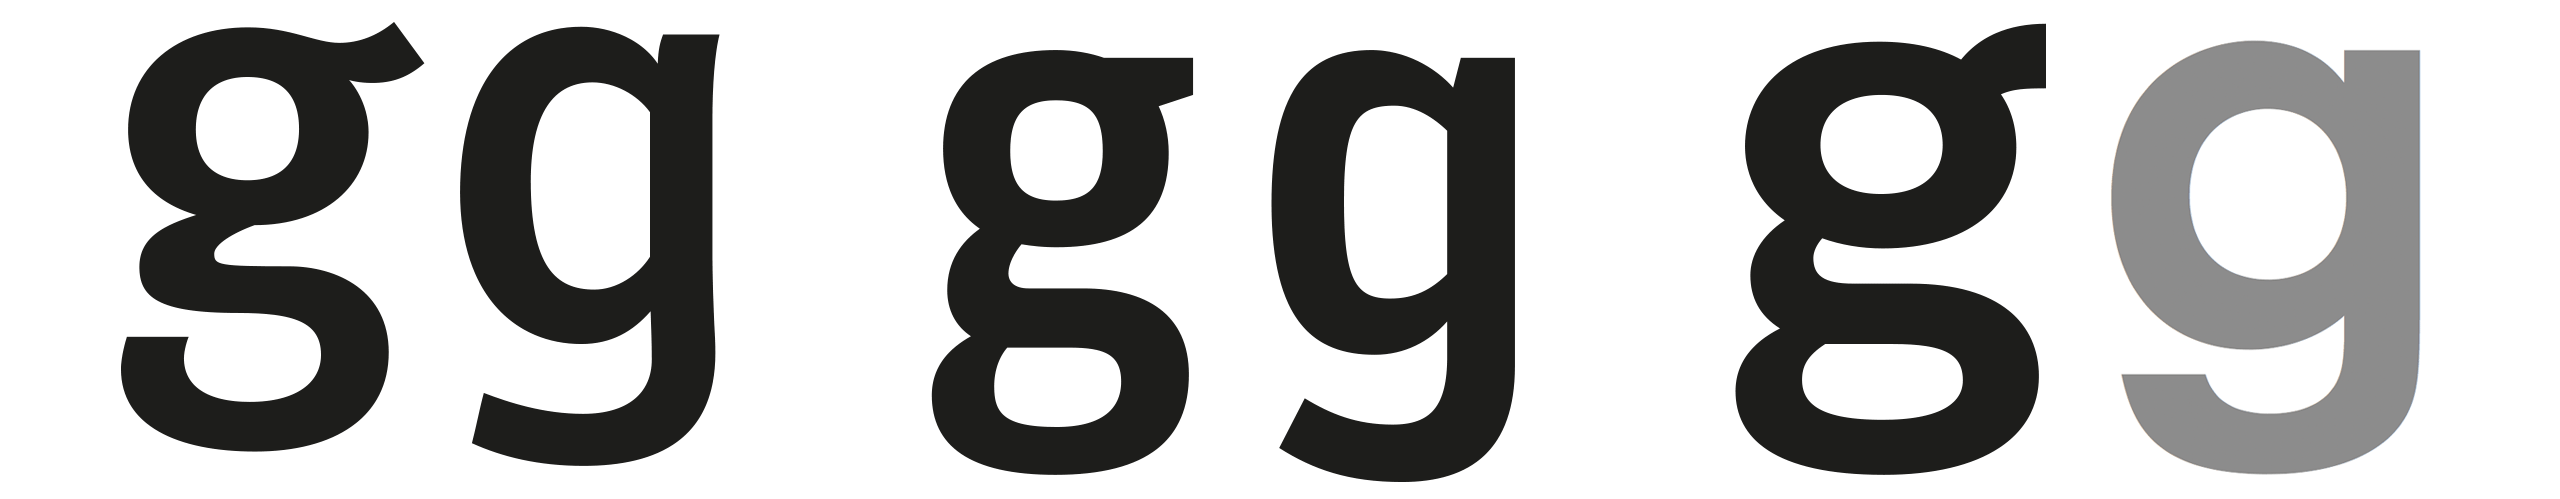 From left to right: FF Meta, FF Unit and FF Real. The double-story ’g’ is the default ’g’ in all three typefaces. The alternative single-story ’g‘ of FF Real was drawn but unfortunately not exported into the final font files.